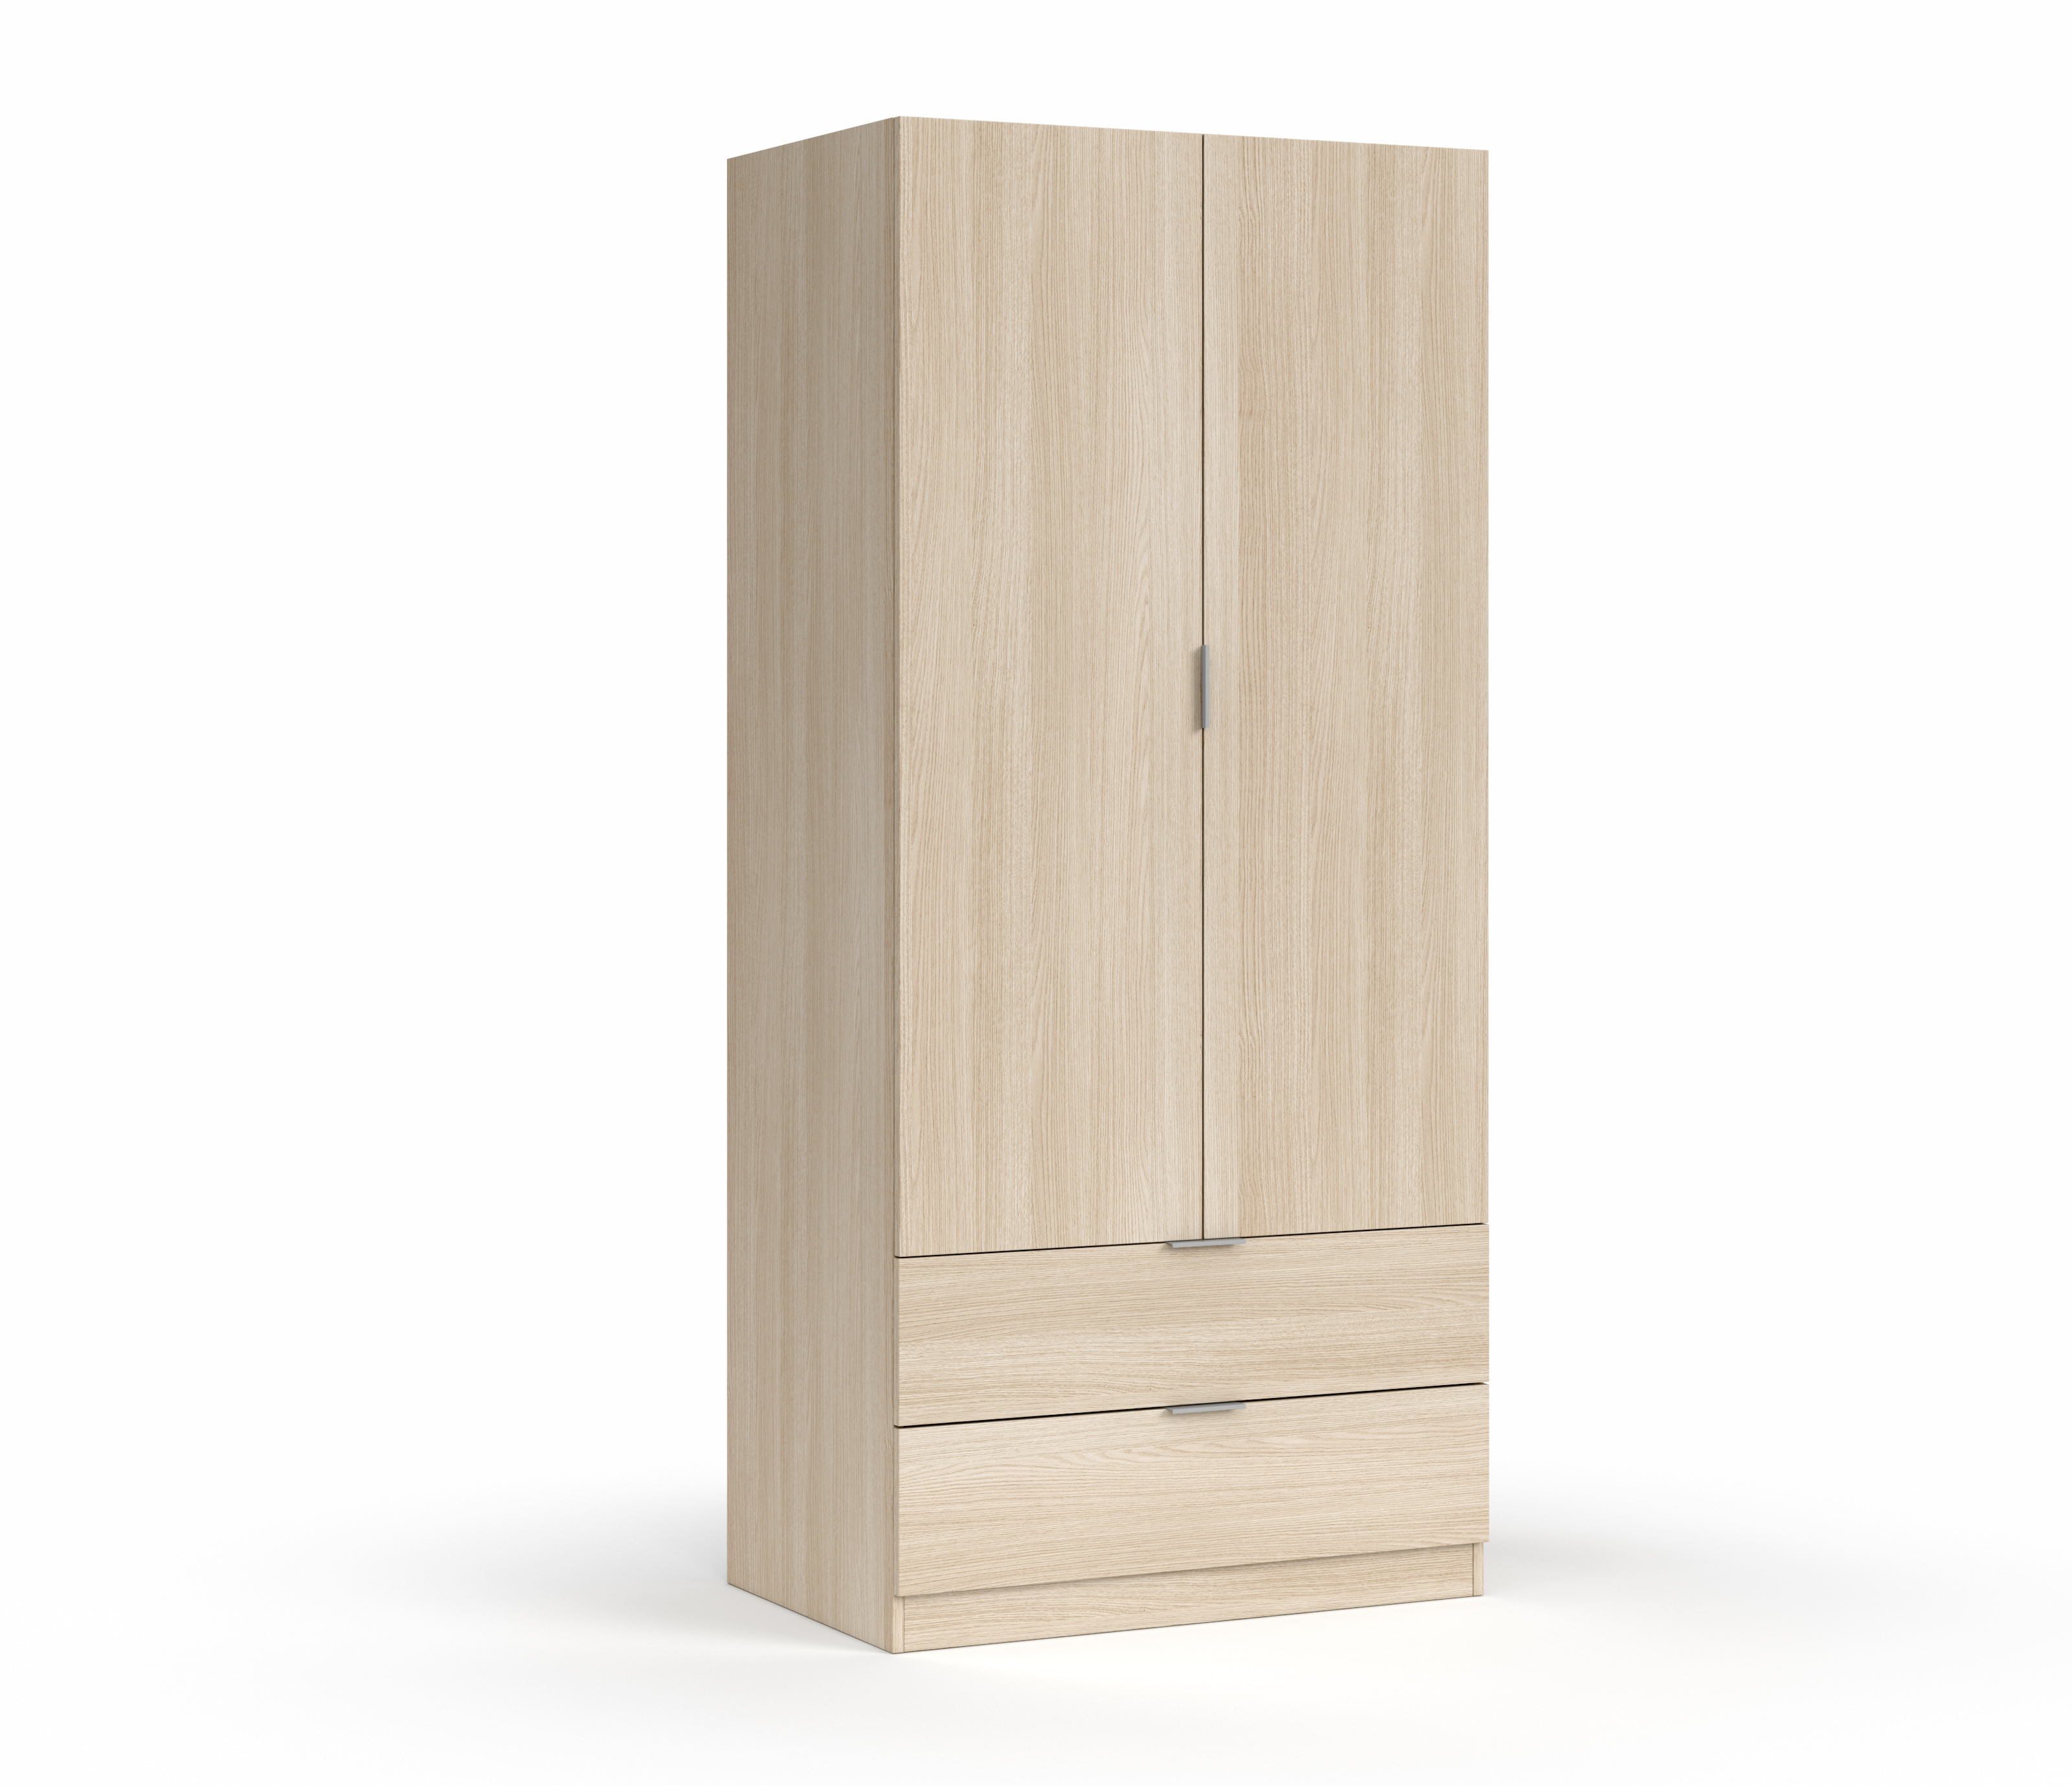 FORES 00X222R WARDROBE 2 DOORS AND 2 DRAWERS OAK 180X81X52CM